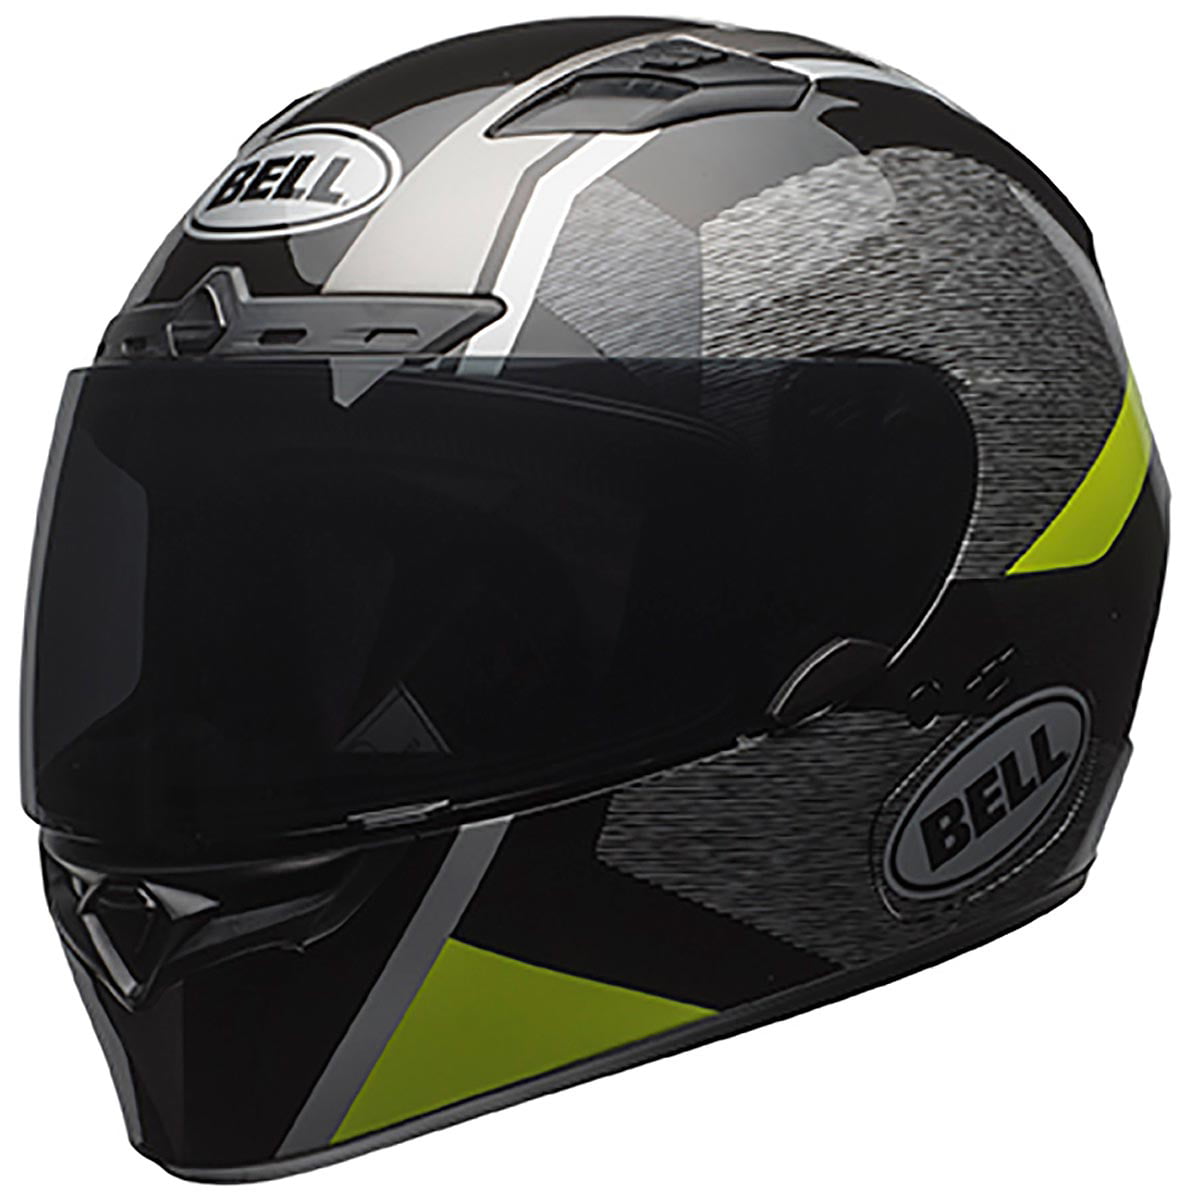 Bell Qualifier DLX MIPS Full-Face Motorcycle Helmet (Accelerator 